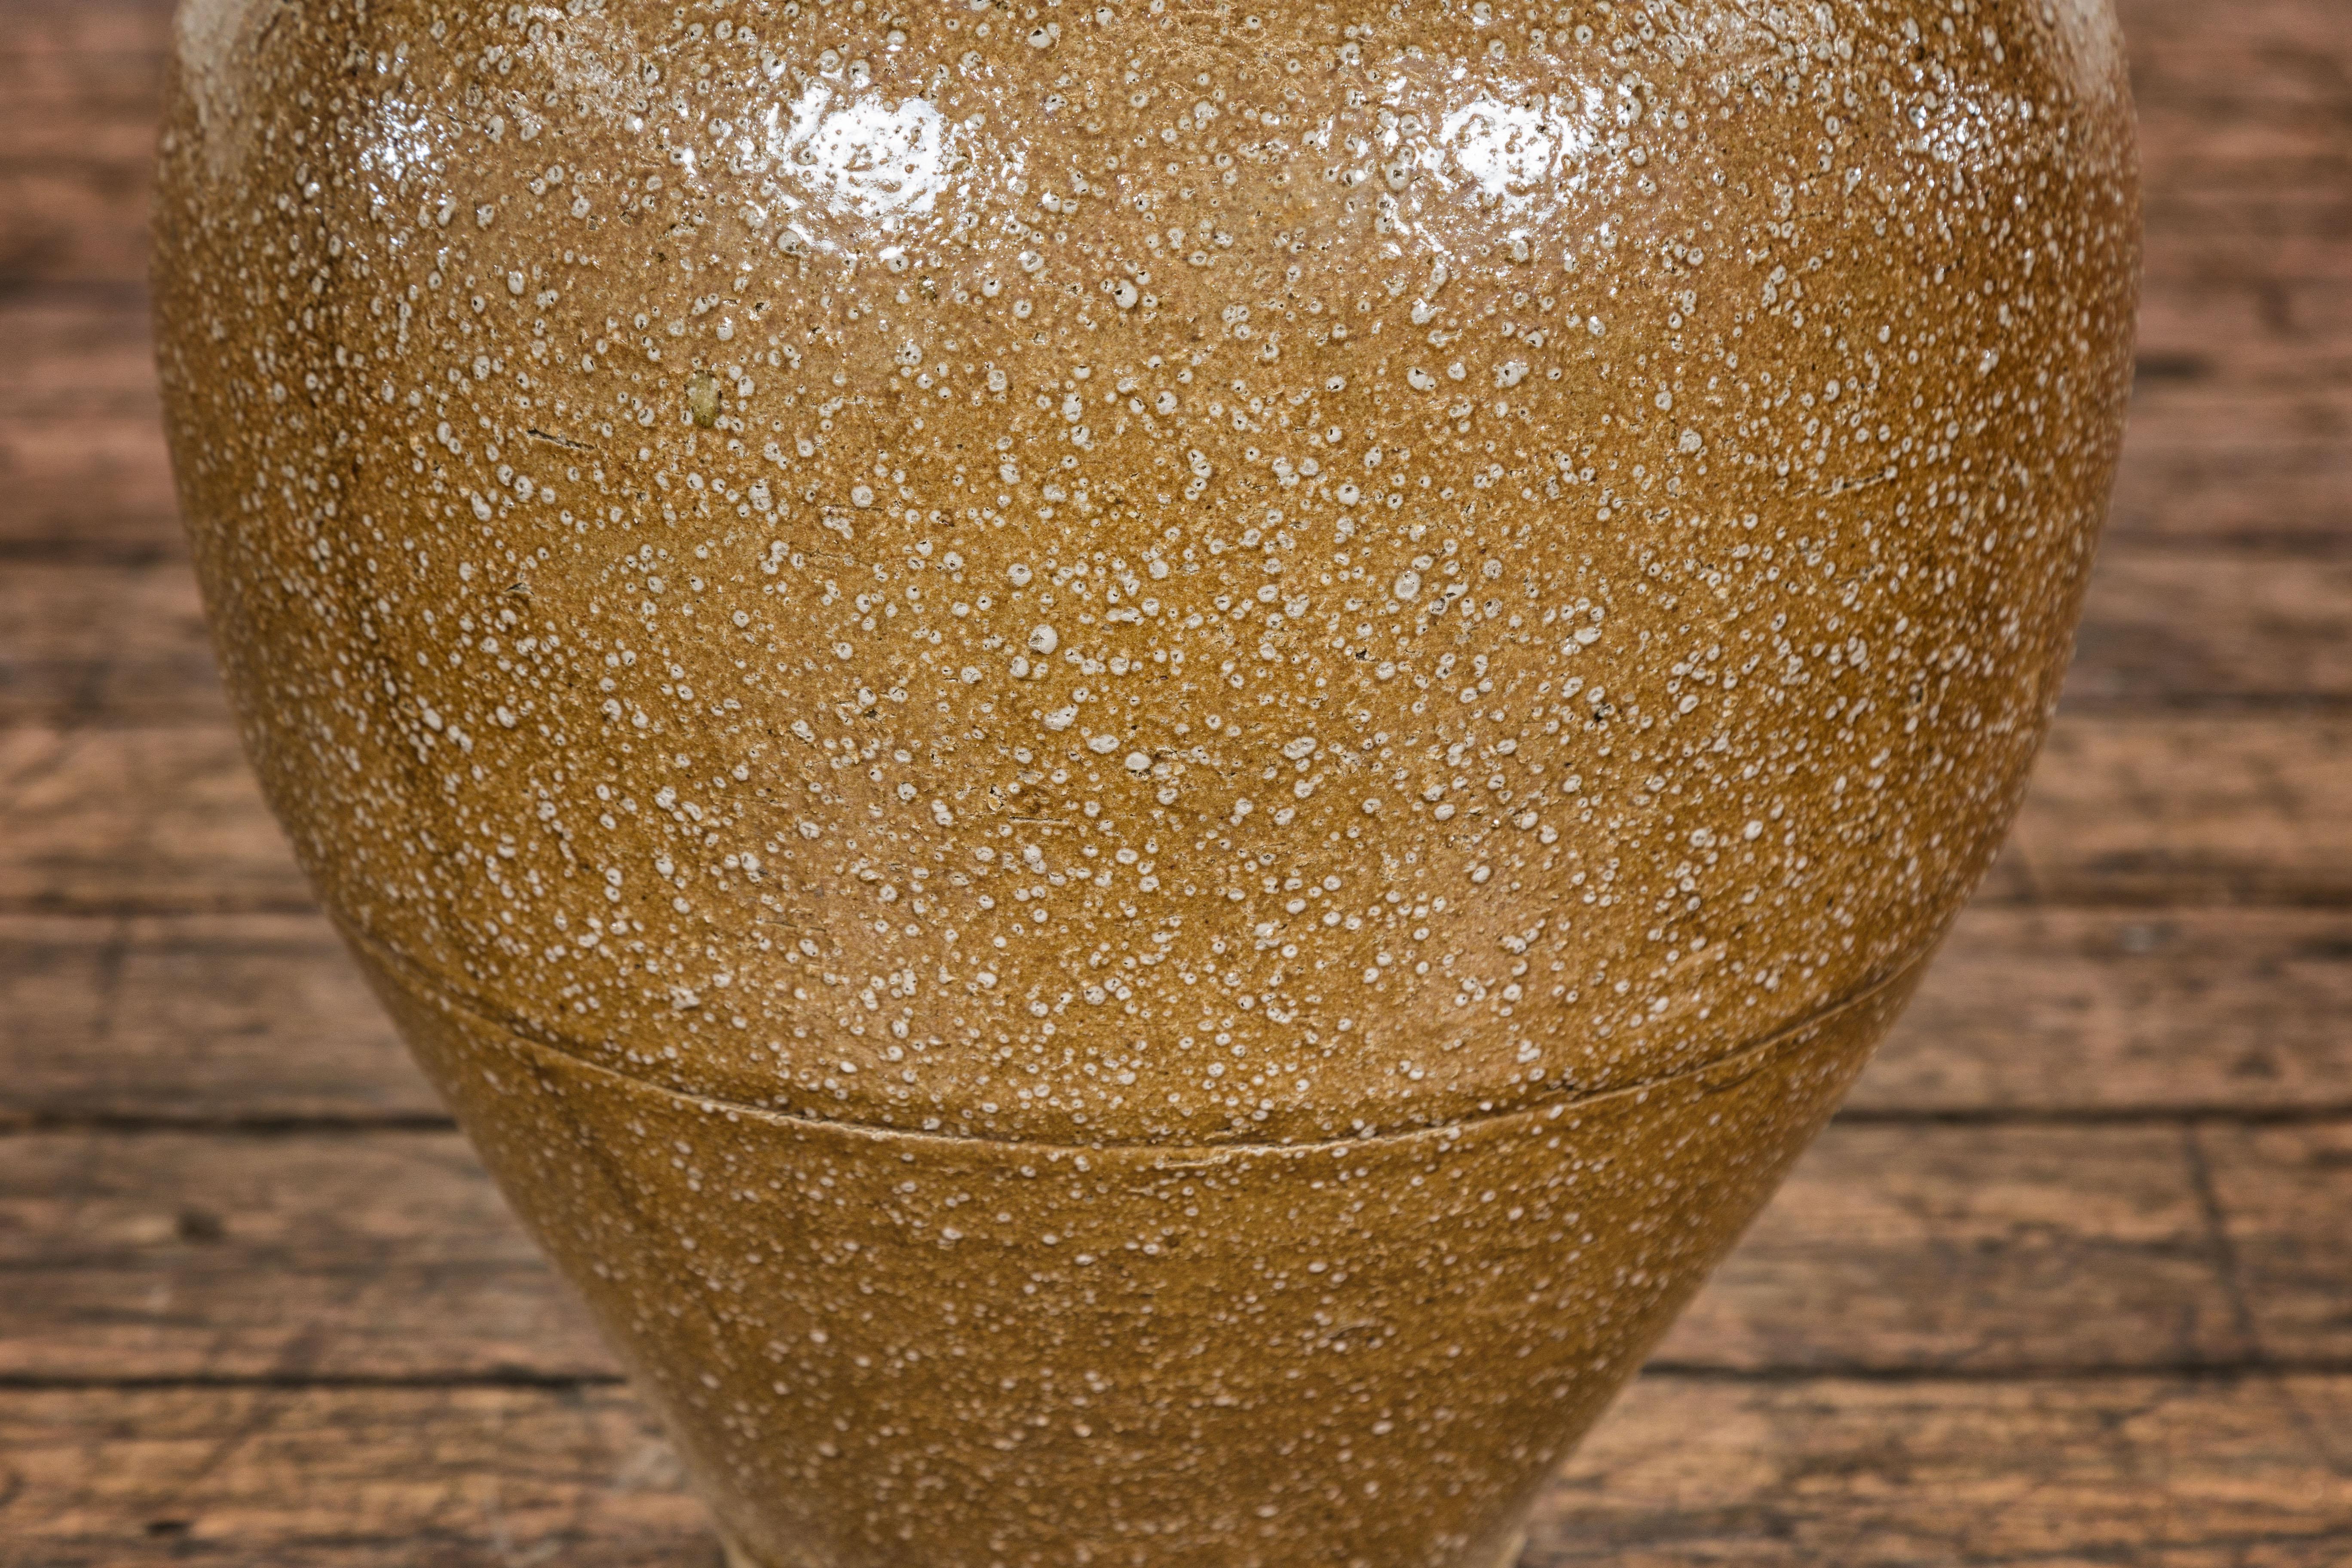 20th Century Japanese Taishō Period Two-Tone Sand Glaze Vase with Textured Finish, circa 1900 For Sale